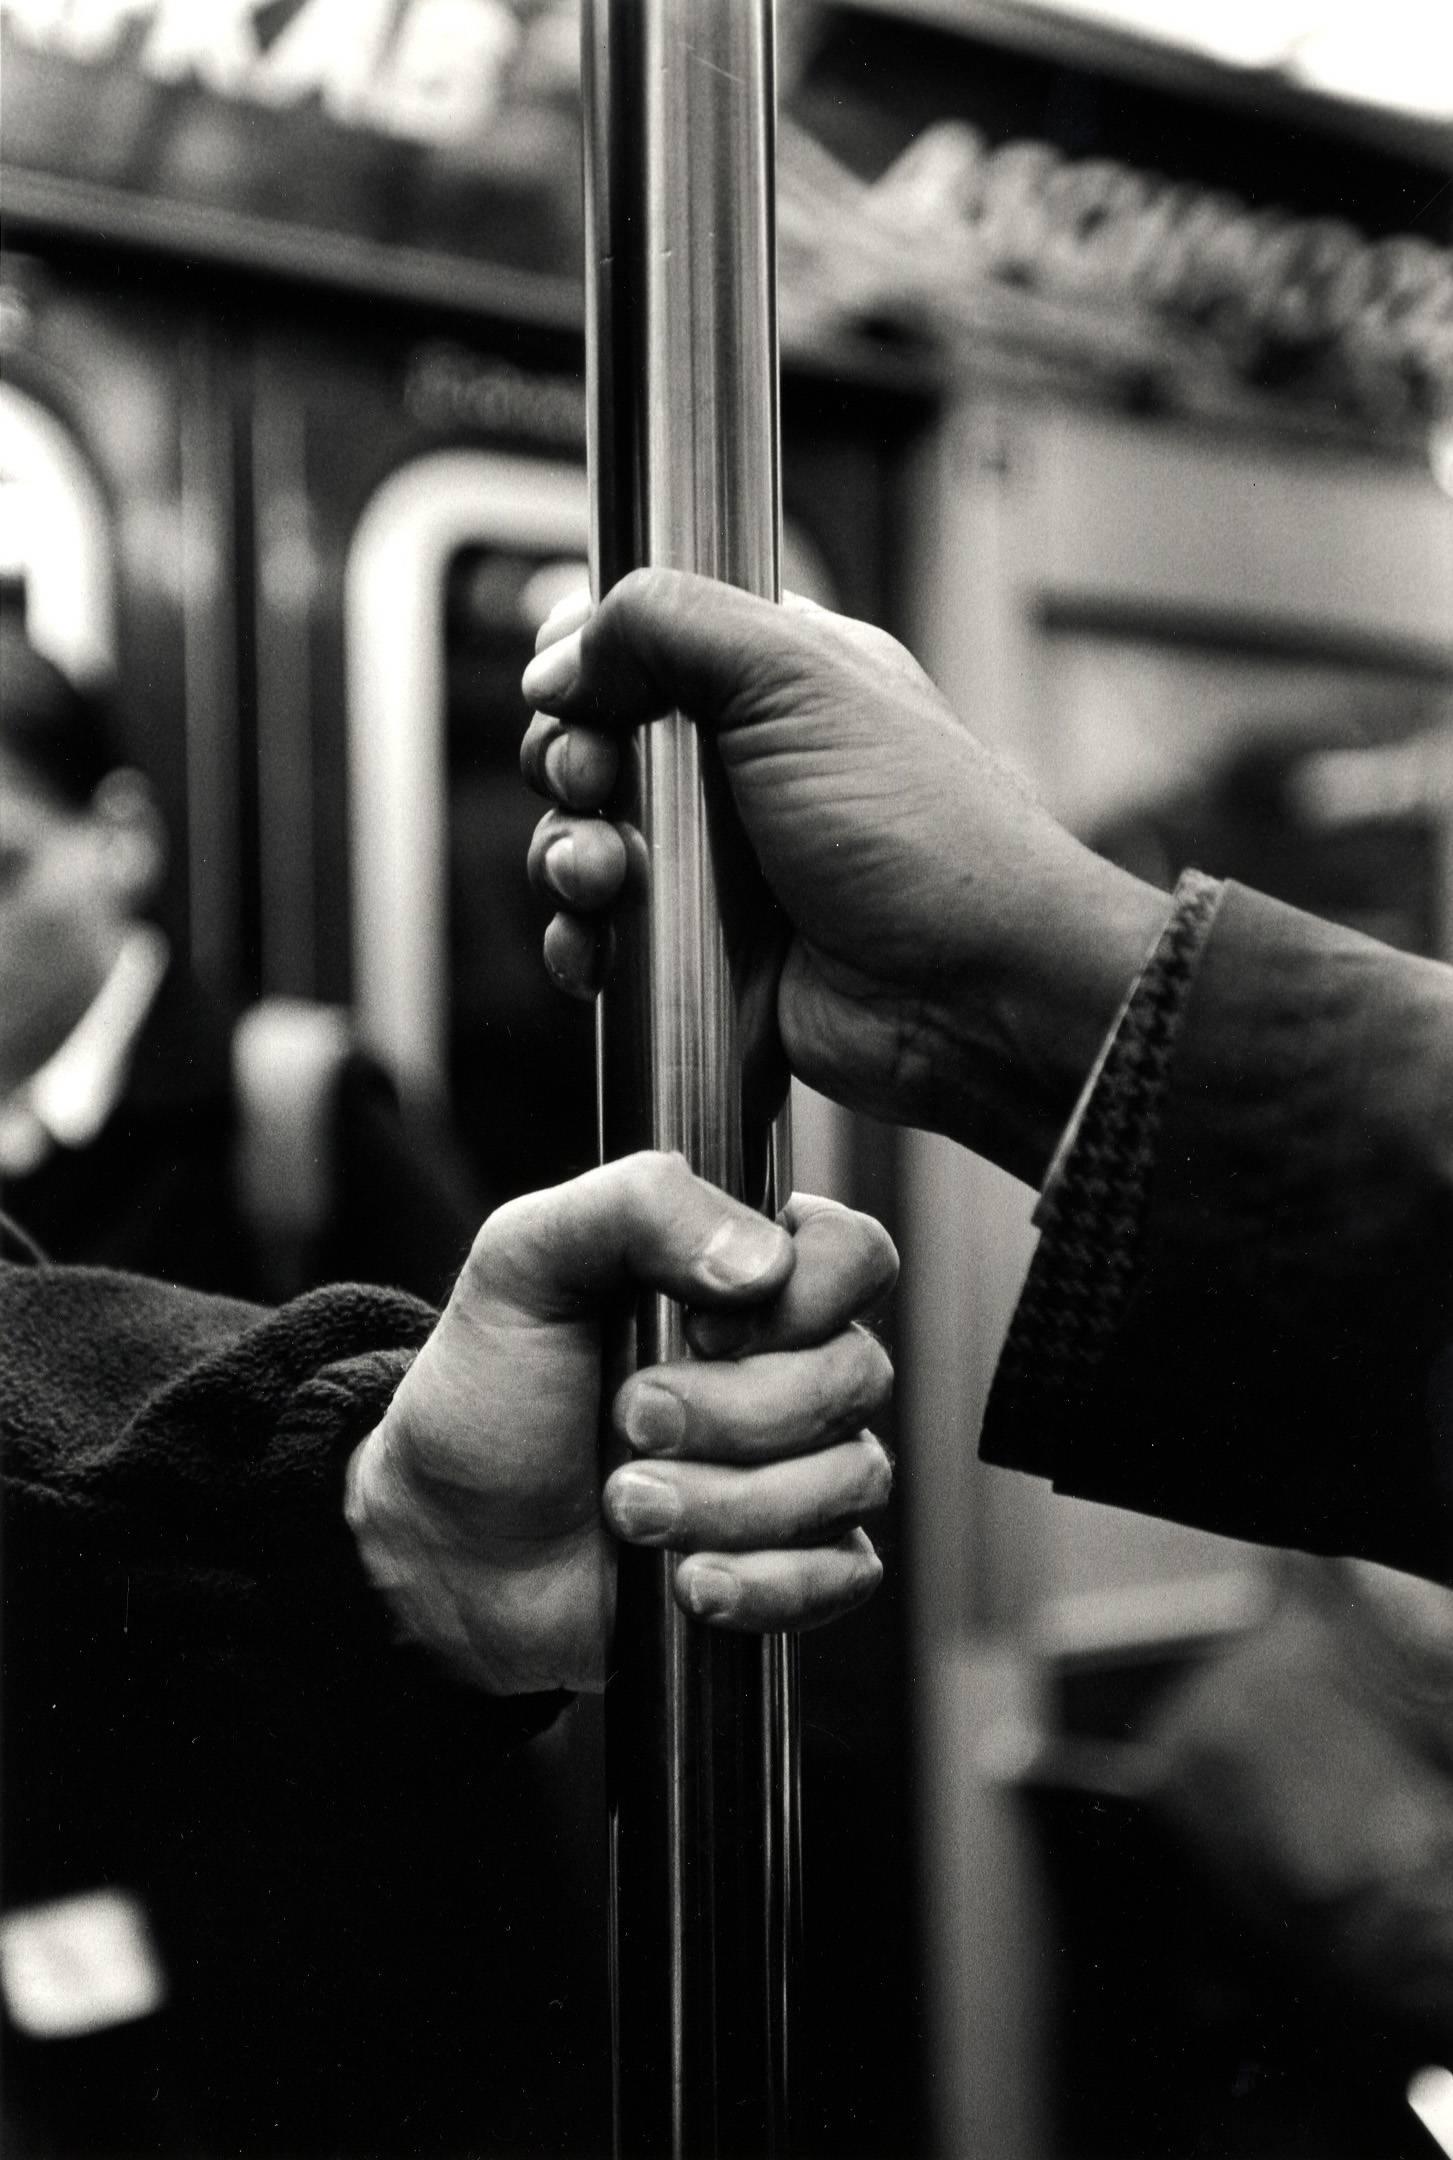 Kazuo Sumida Black and White Photograph - B Train (from the series A Story of the New York Subway)